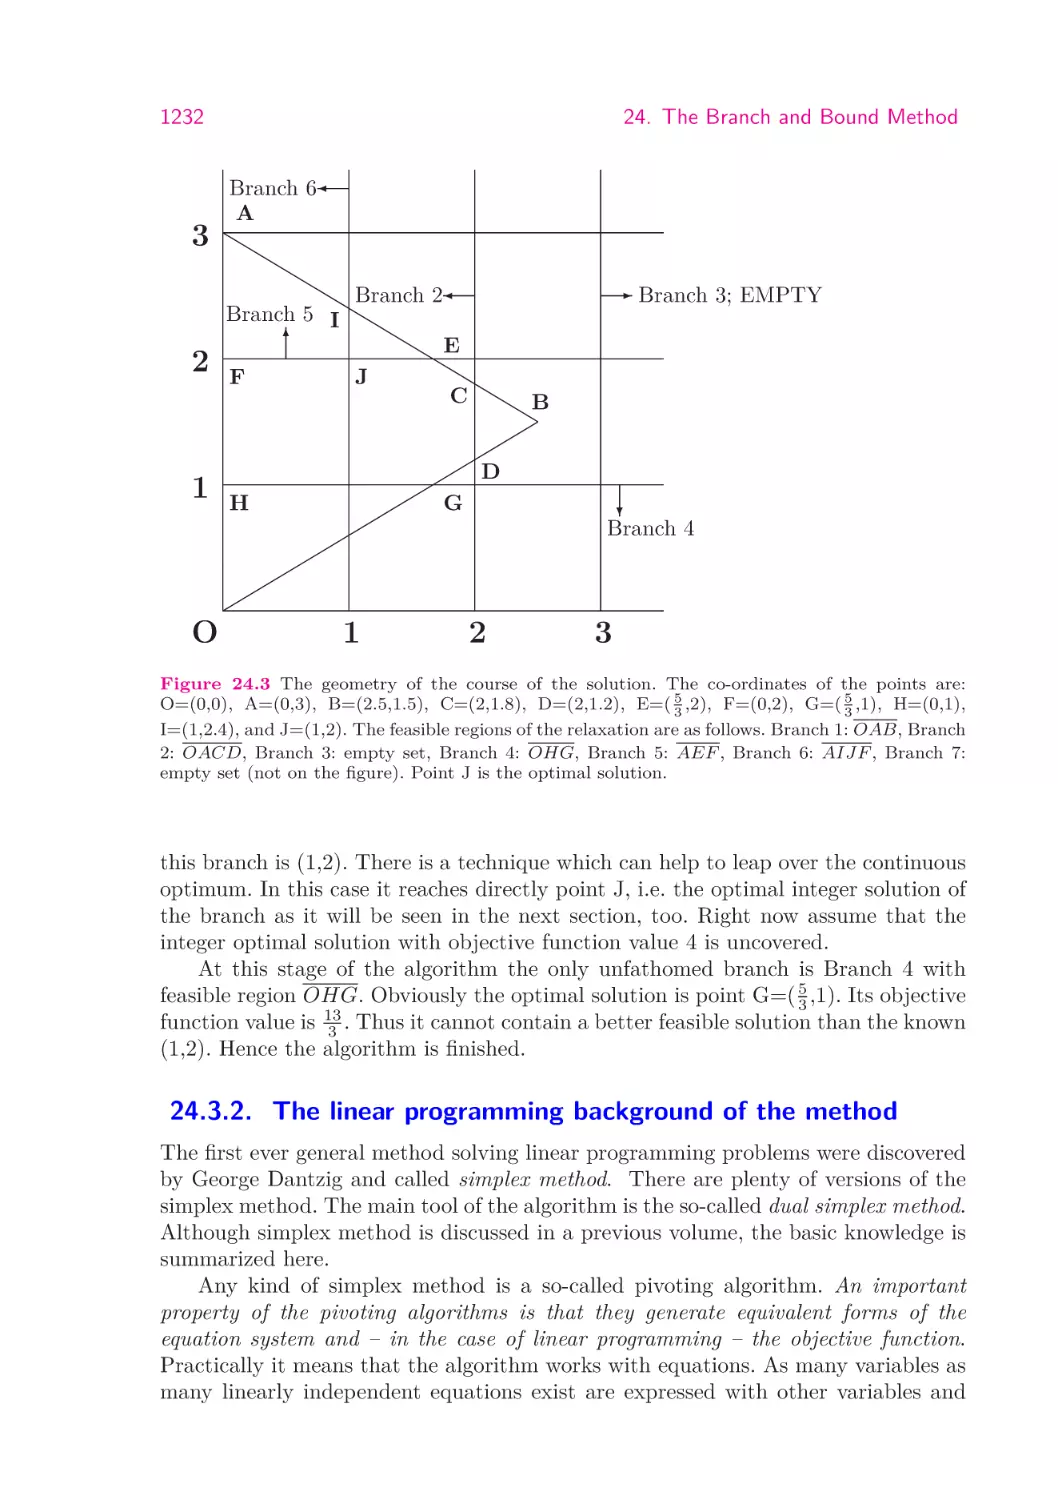 24.3.2.  The linear programming background of the method